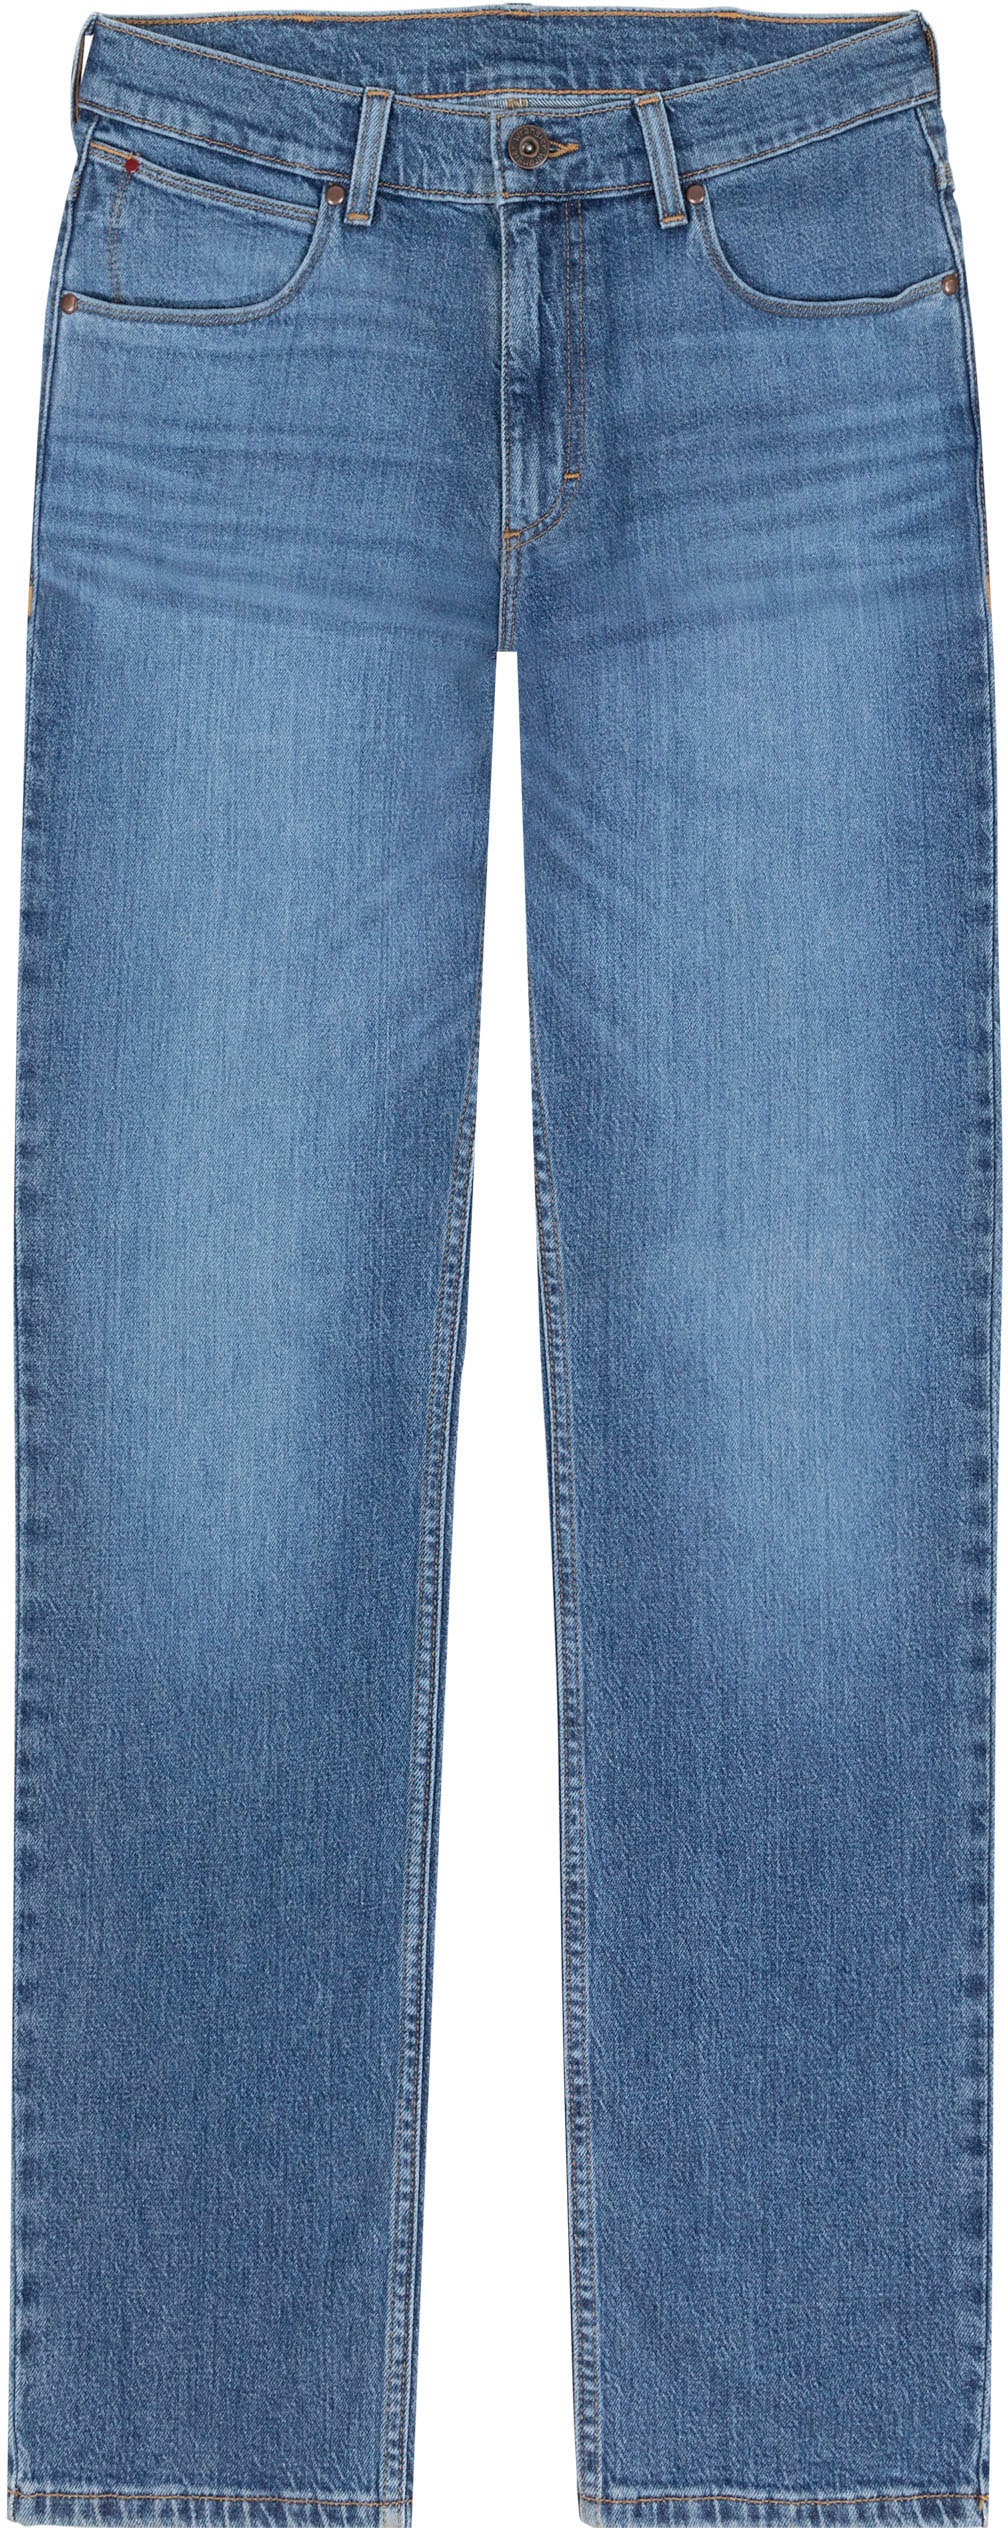 Wrangler Straight-Jeans kaufen bequem »Authentic Straight«